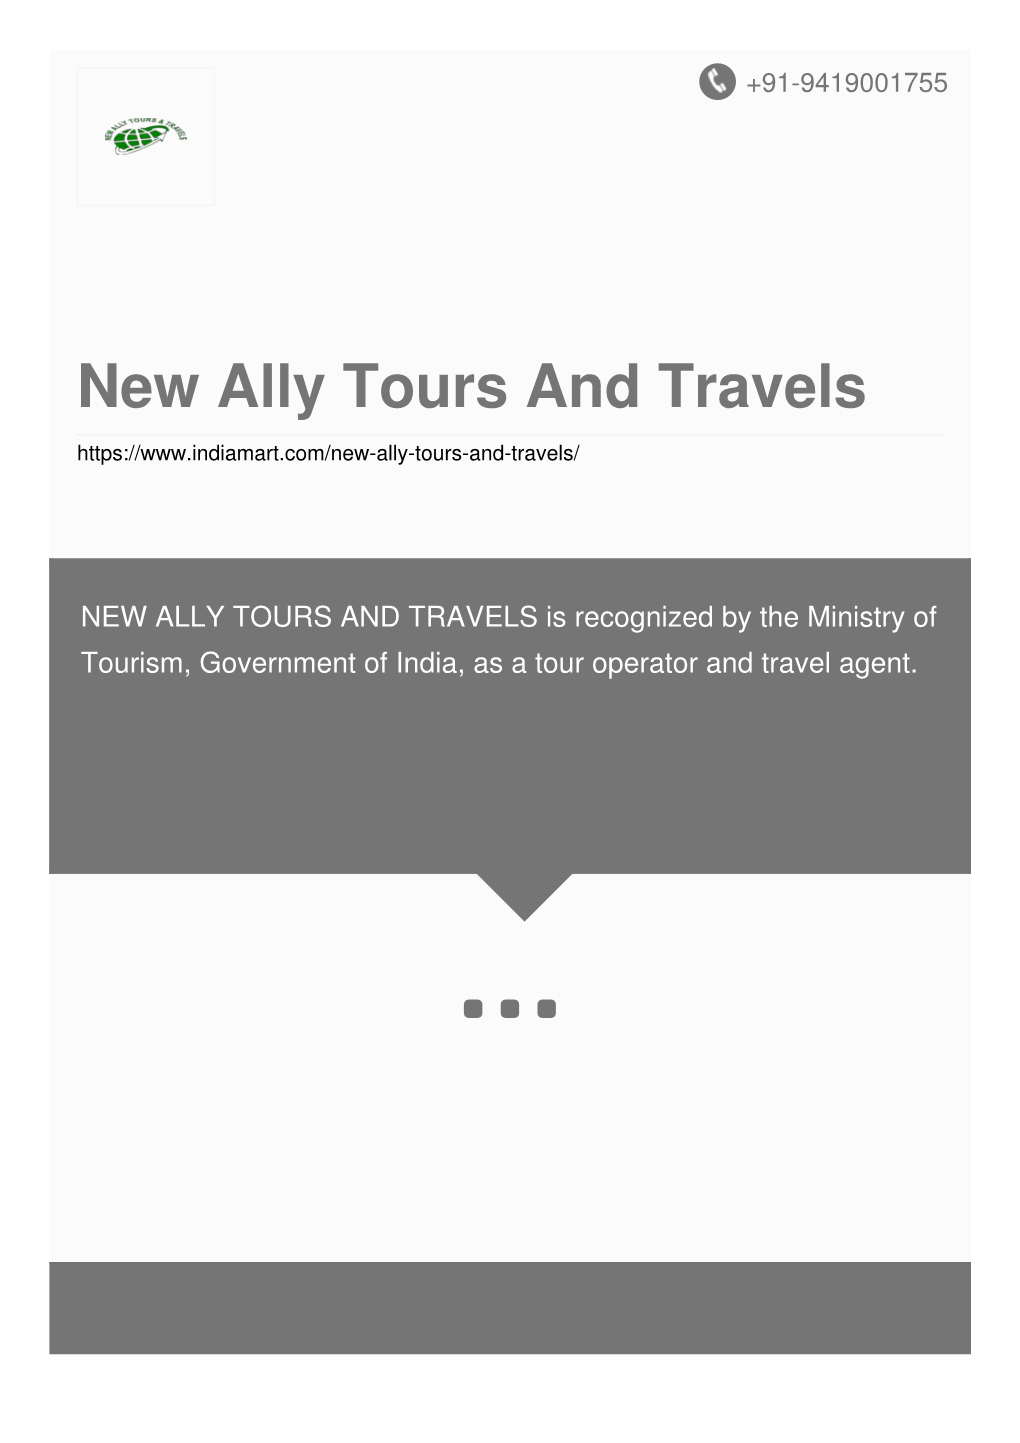 New Ally Tours and Travels